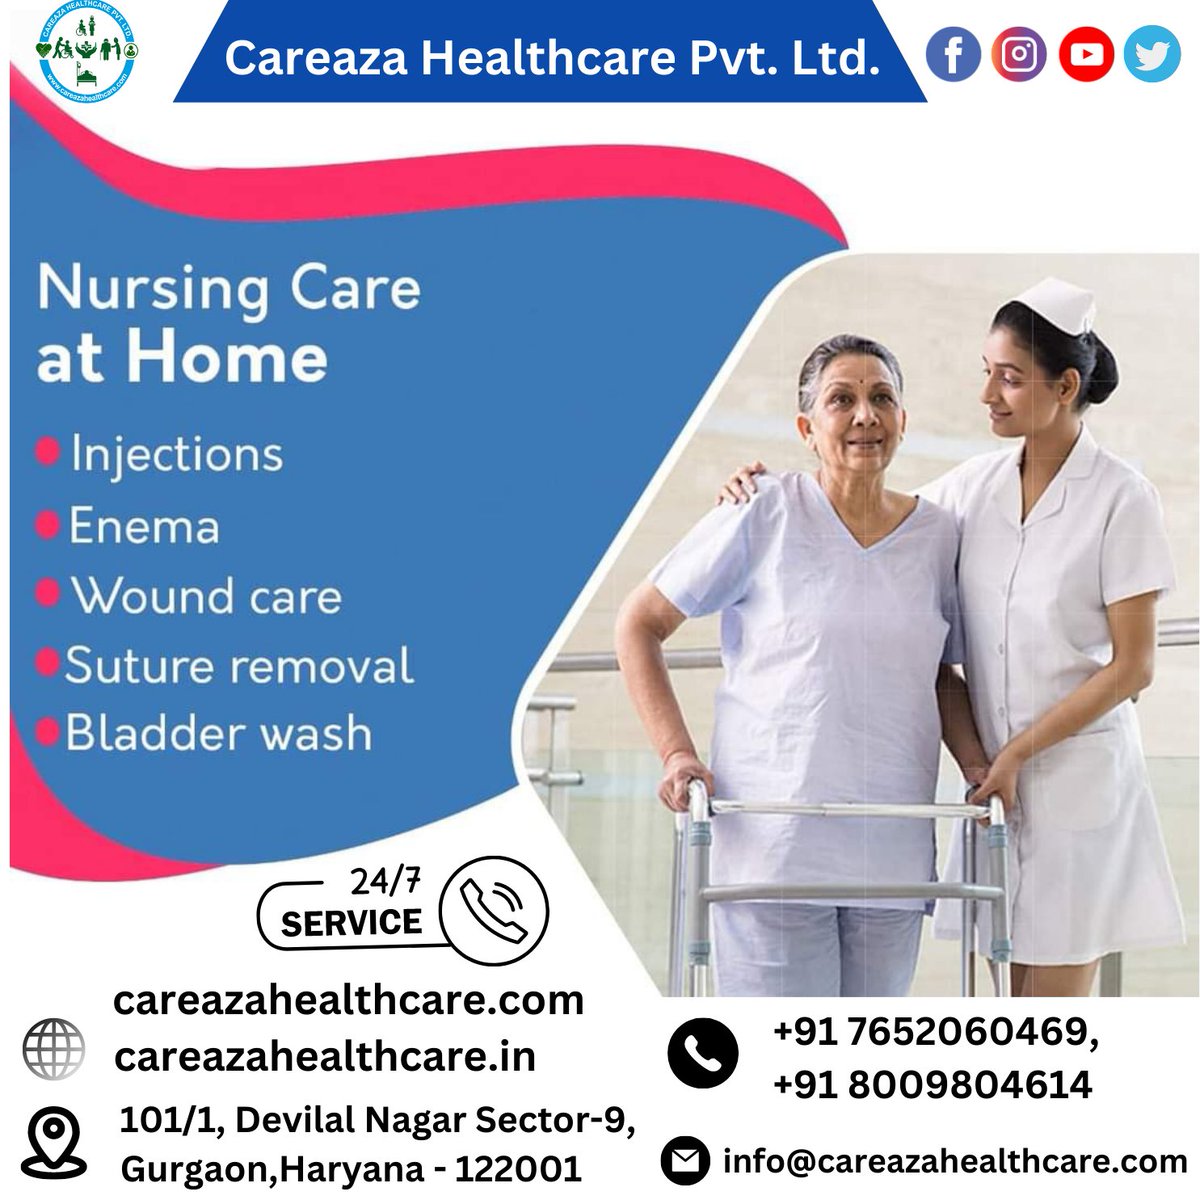 Book patient care services in Gurgaon for trained and experienced healthcare professionals to take care of your loved ones.

#HomeHealthcareServicesAtHome, #NursingCare, #BabyCare, #ElderCare, #CriticalCare, #CareazaHealthcare, #Healthcare, #nursingagency, #patientcare